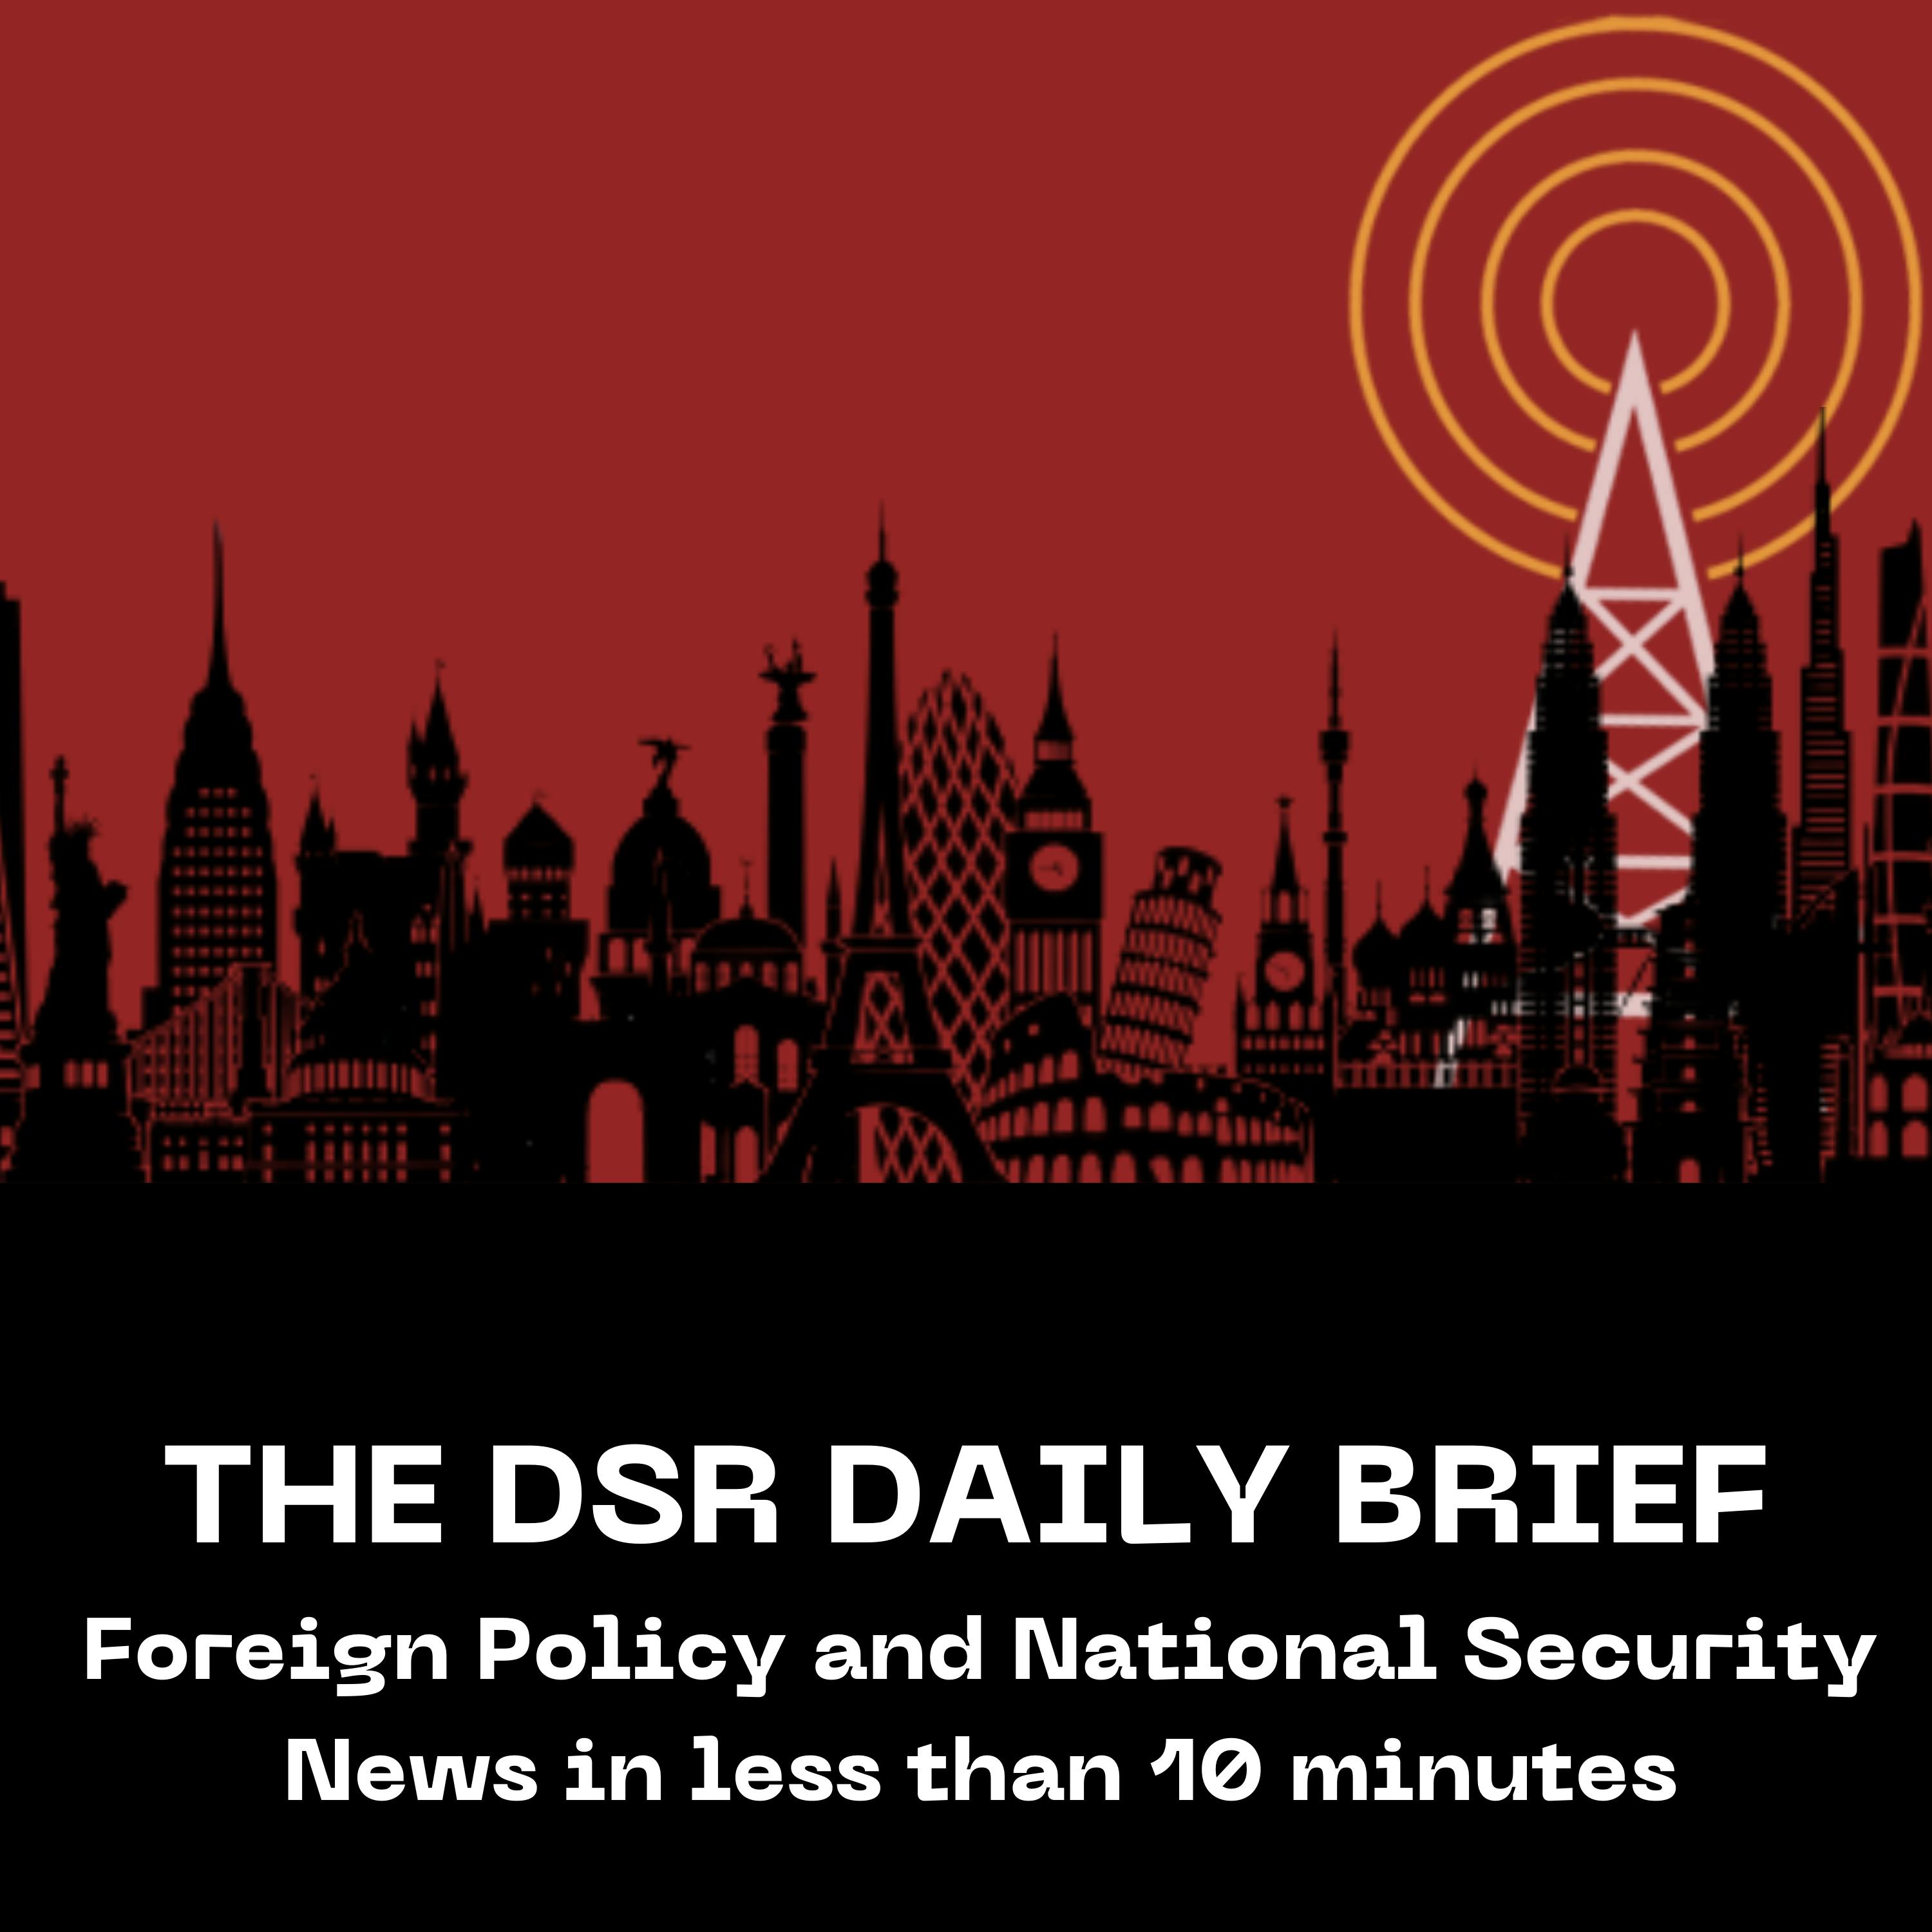 The DSR Daily for March 1 - Senate Approves Stopgap Funding, Biden and Trump Visit Border